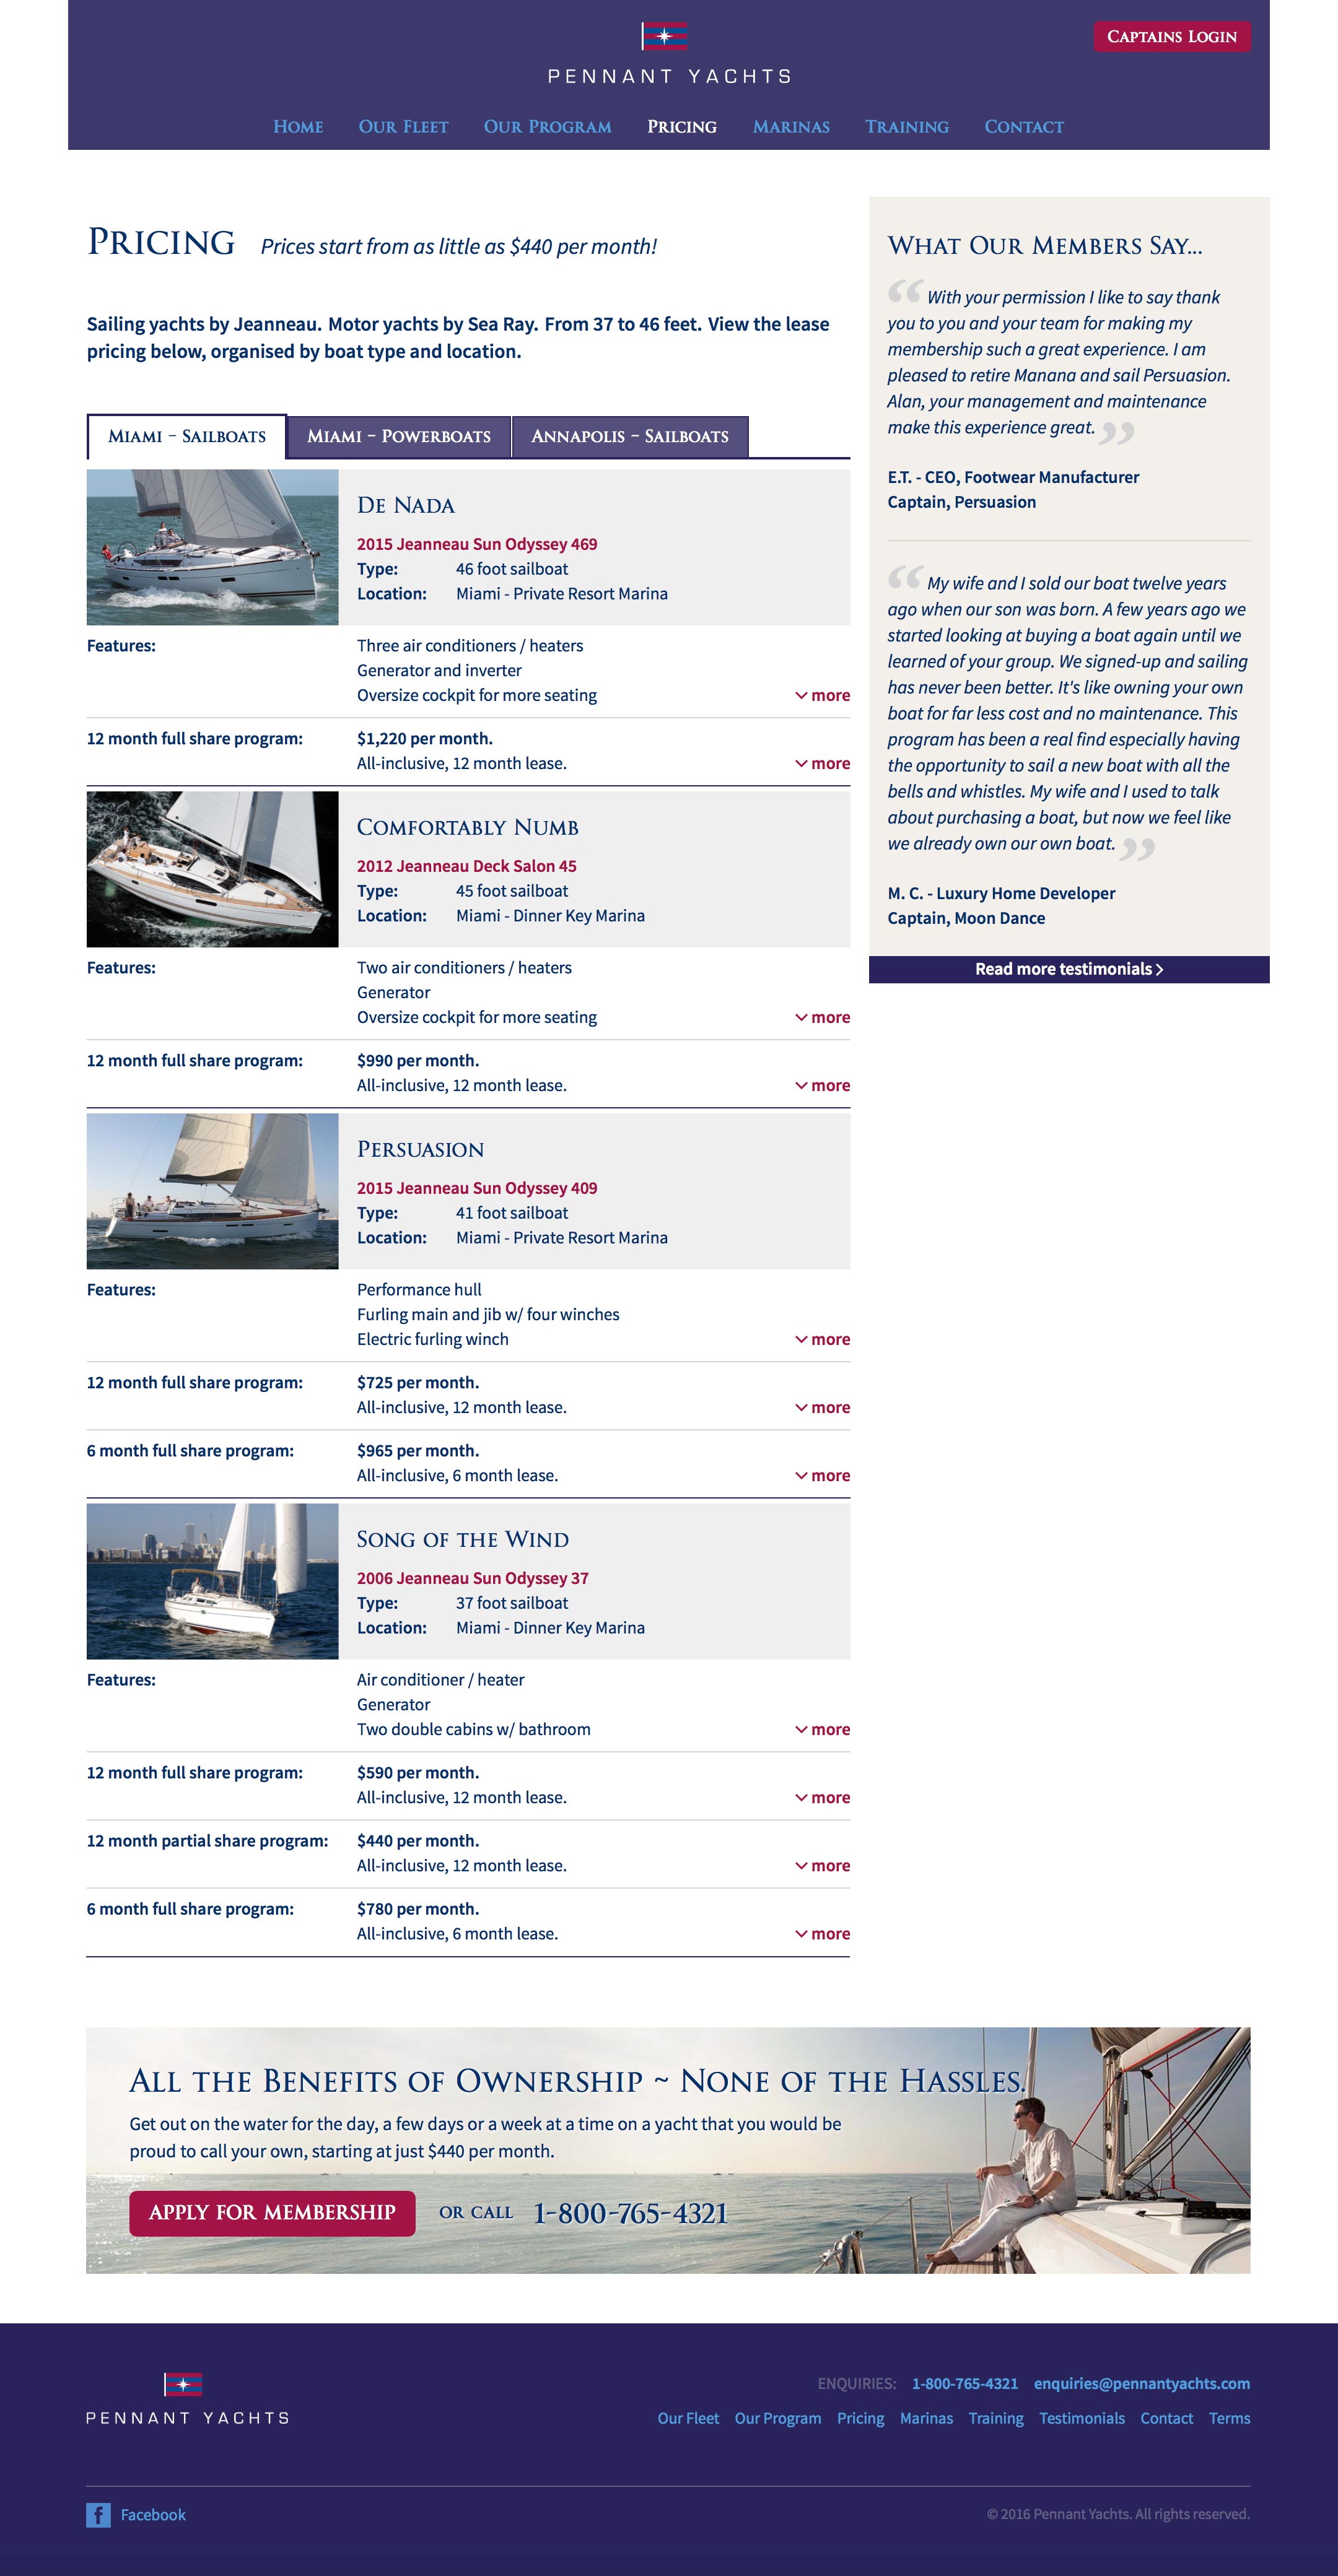 Pricing options for the Pennant Yachts program.